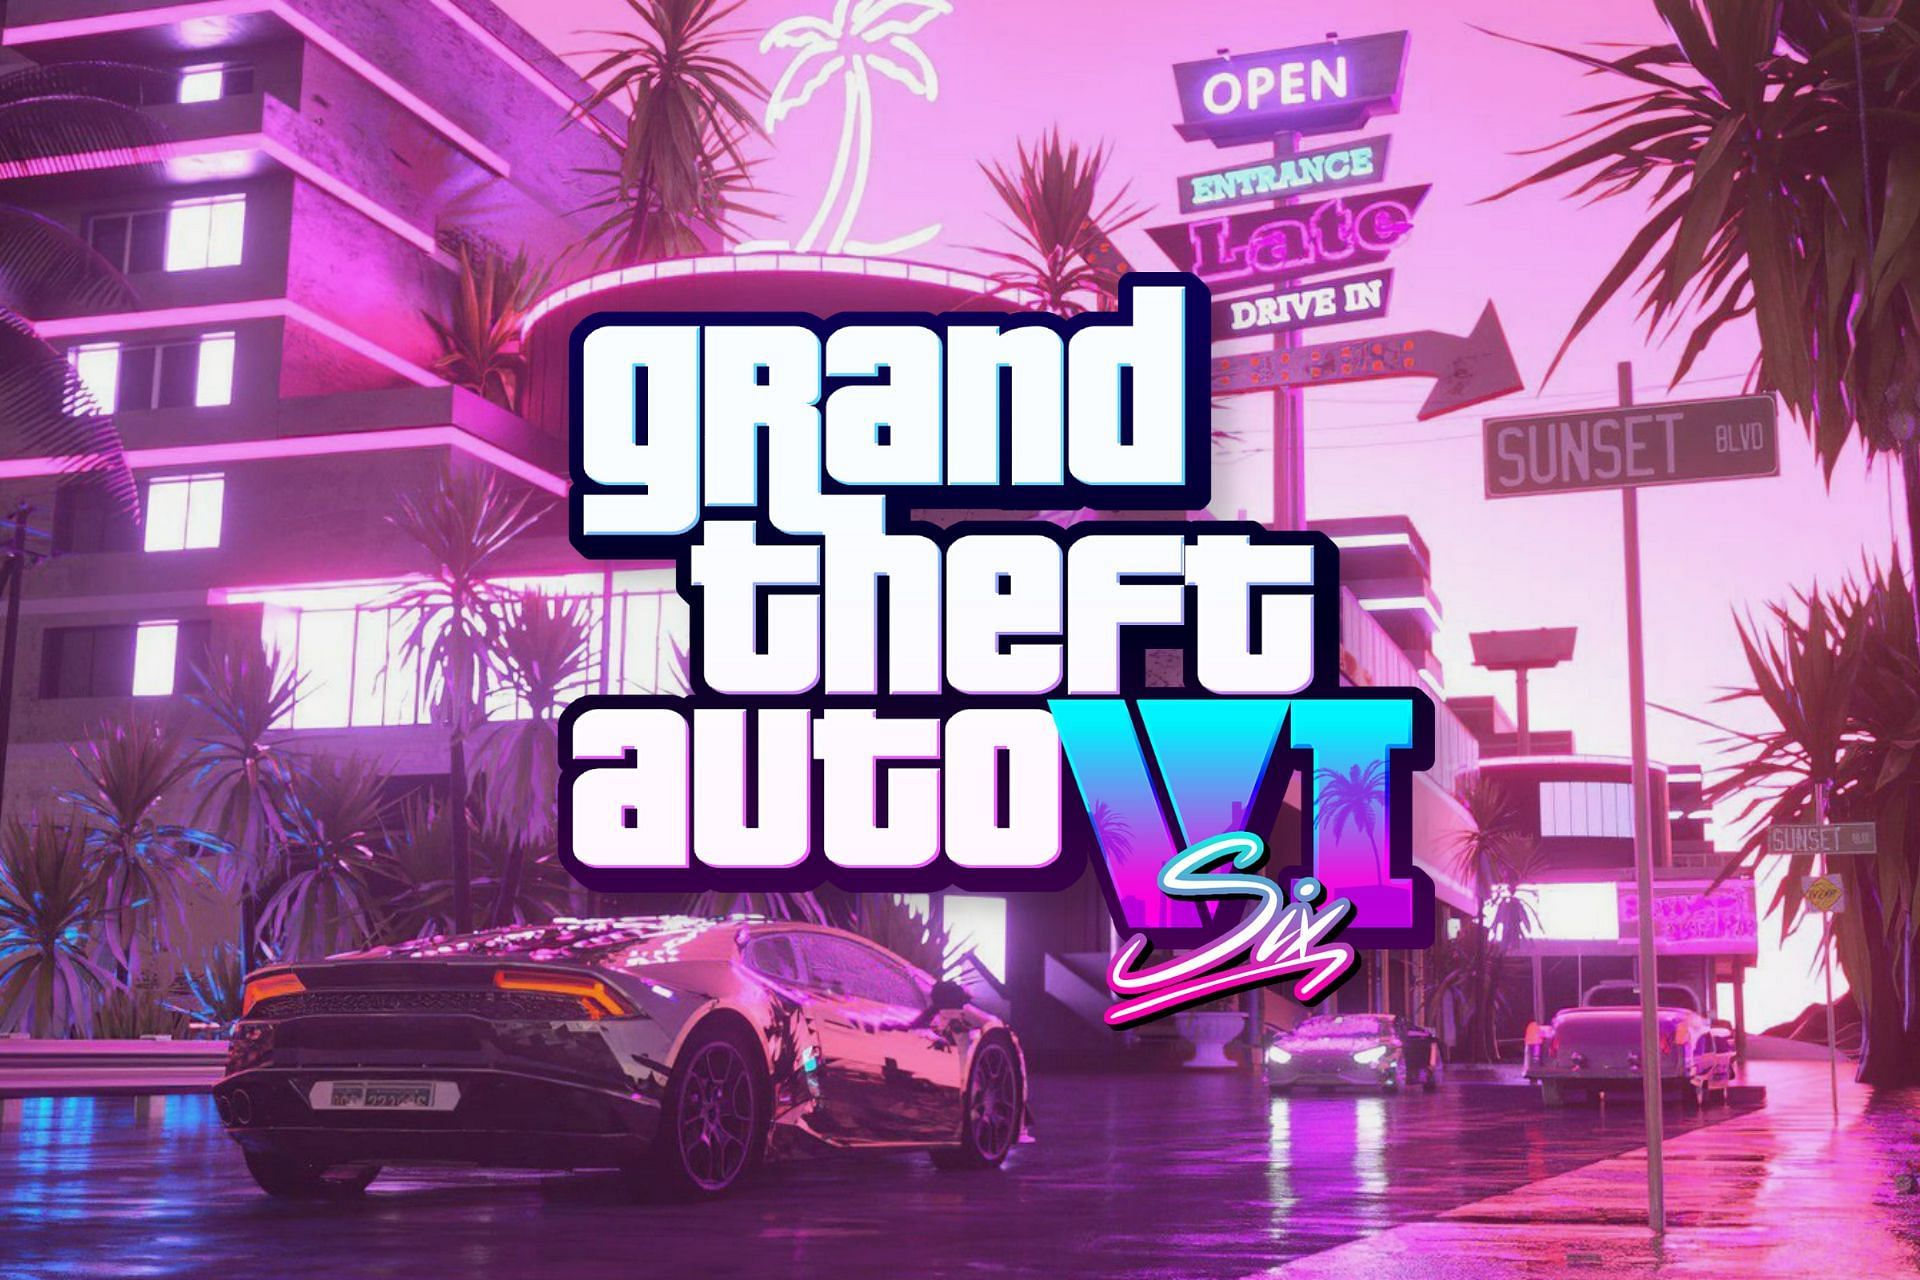 "Y'all thought it was gonna be GTA 6" GTA fans disappointed as game